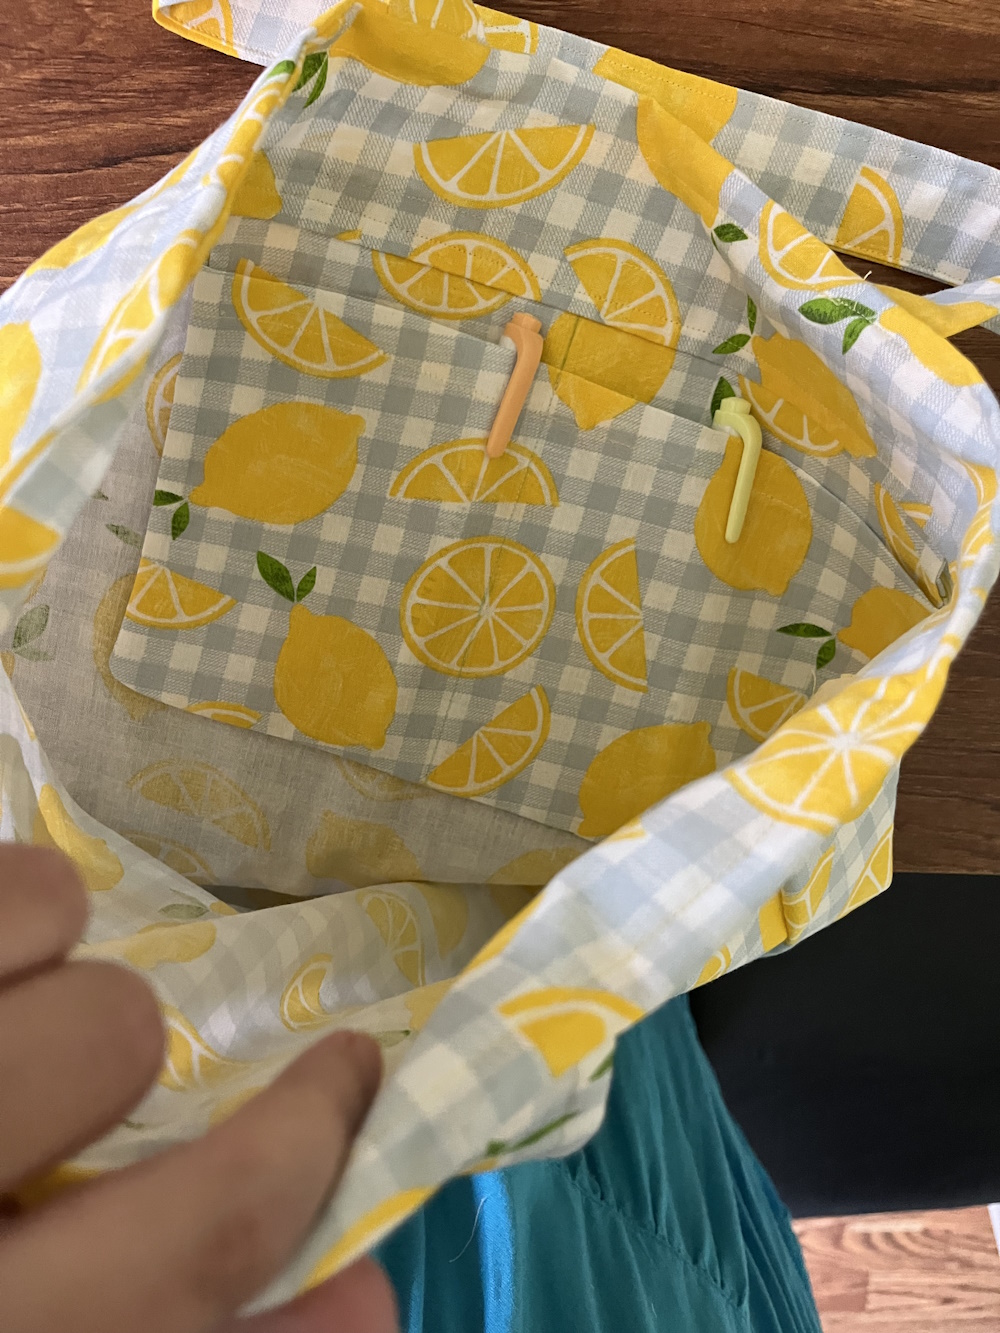 a pocket in said tote bag made with the same print